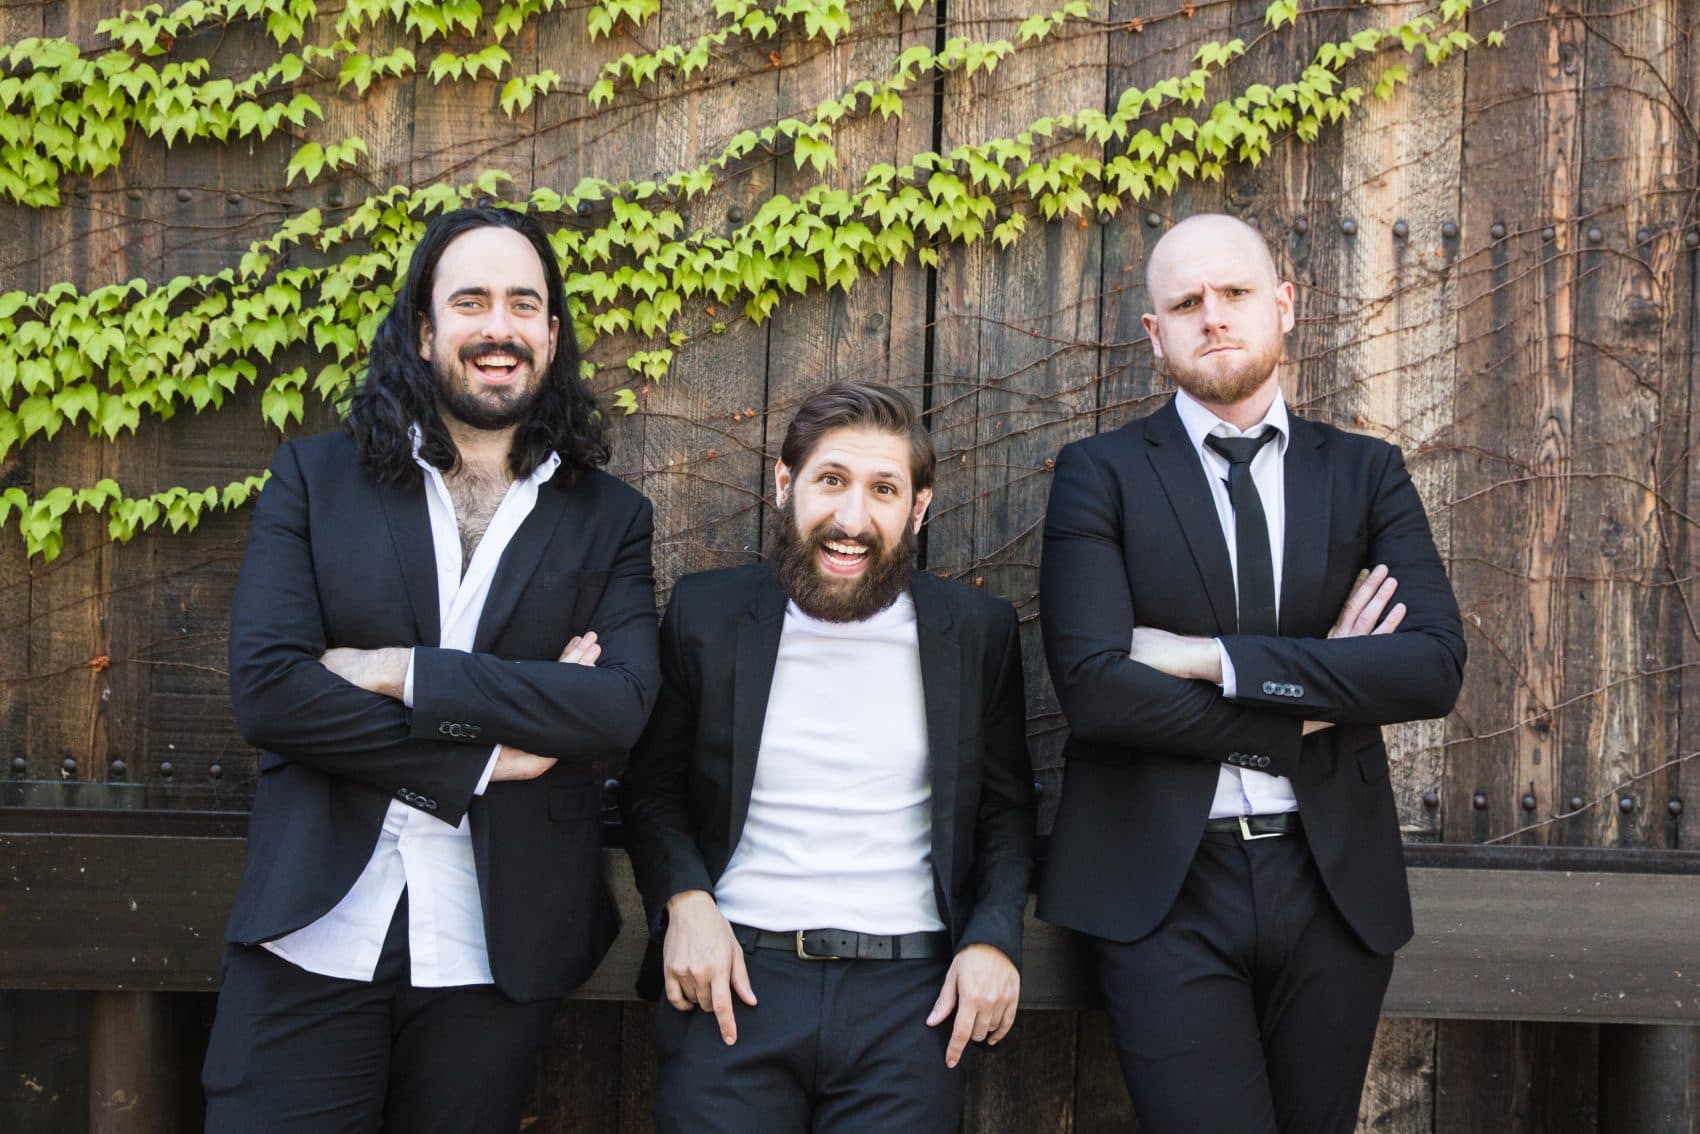 Left to right, Zachary Ruane, Mark Samual Bonanno and Broden Kelly of comedy troupe Aunty Donna. (Courtesy Annelise Nappa)